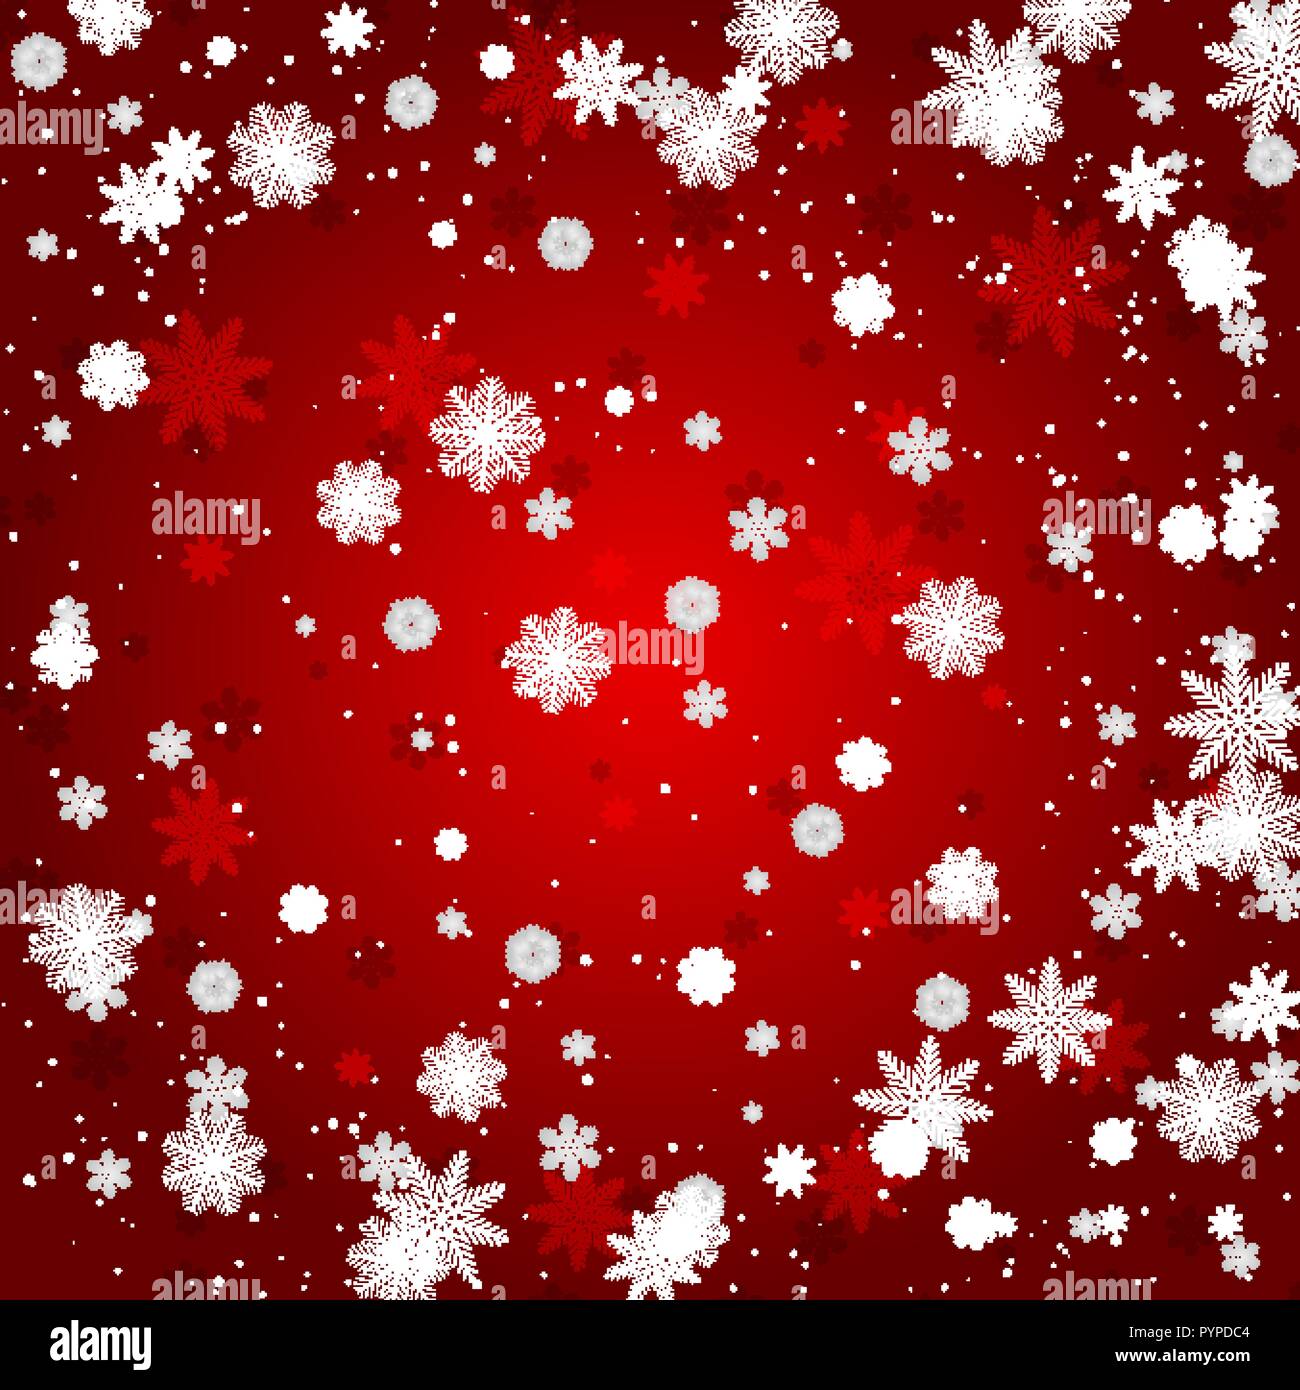 Christmas snowflake with night star light and snow fall abstract bakcground vector illustration eps10 Stock Vector